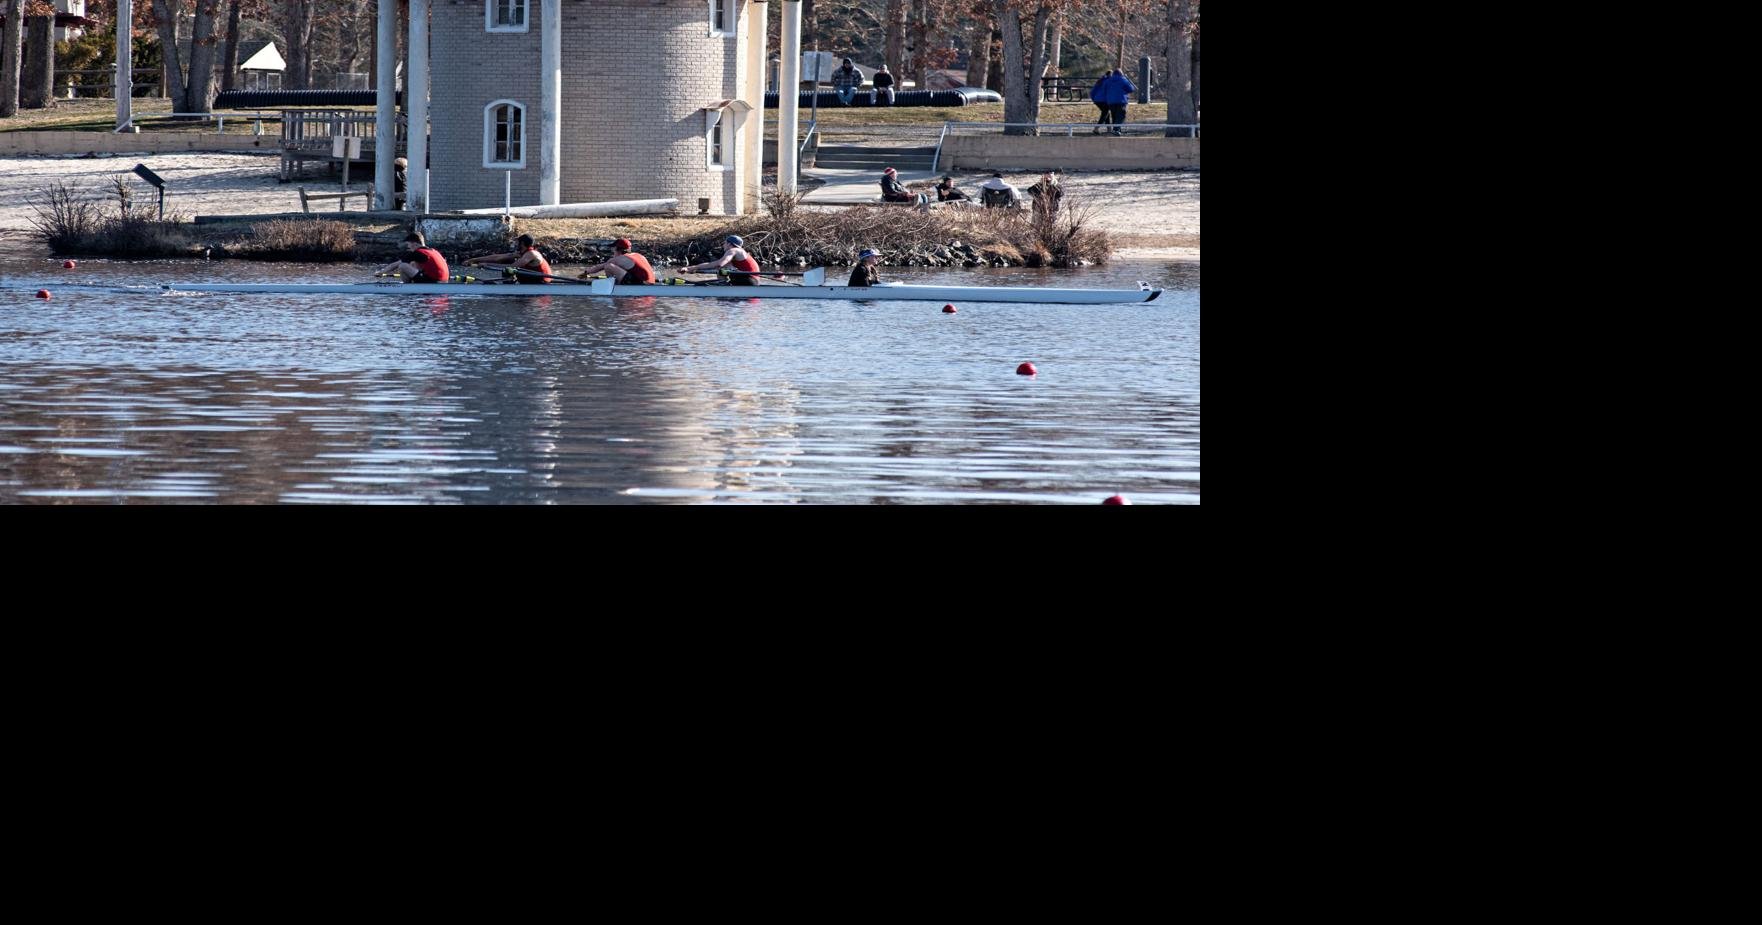 Ideal rowing conditions, good racing but no fans as Lake Lenape Sprints